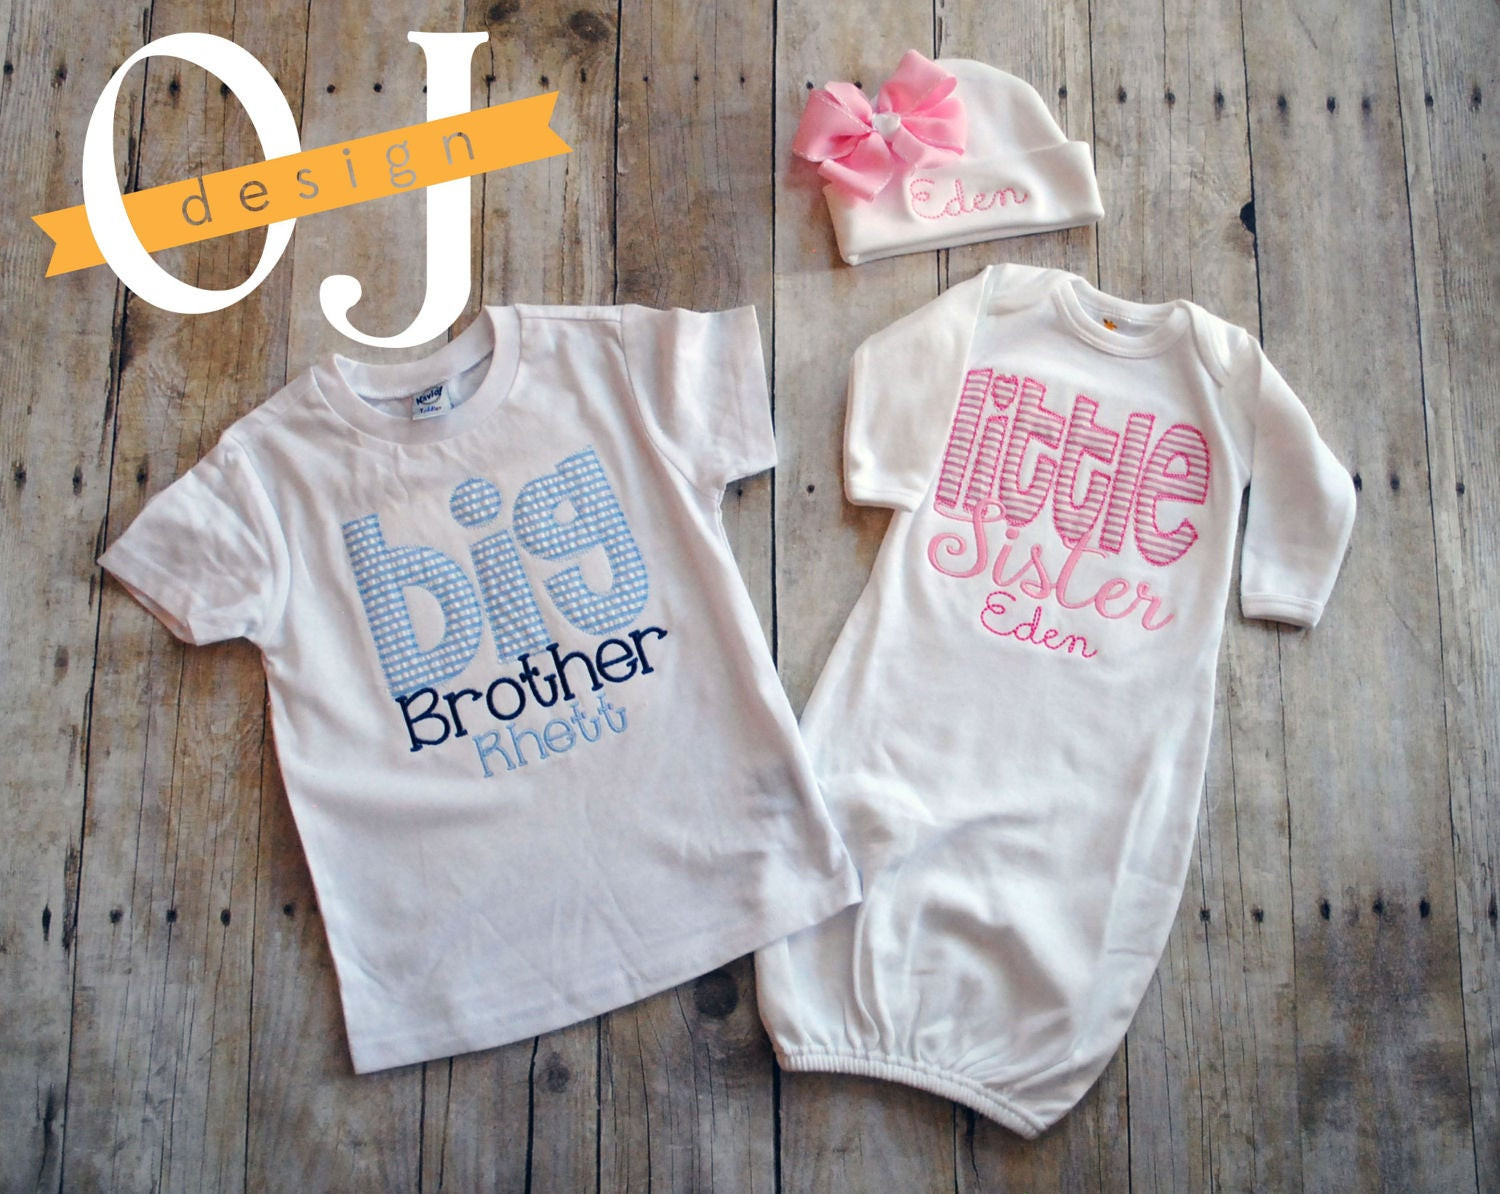 Big Sister Gifts From Baby
 Big Brother Little Sister Personalized Baby Newborn Gift Set